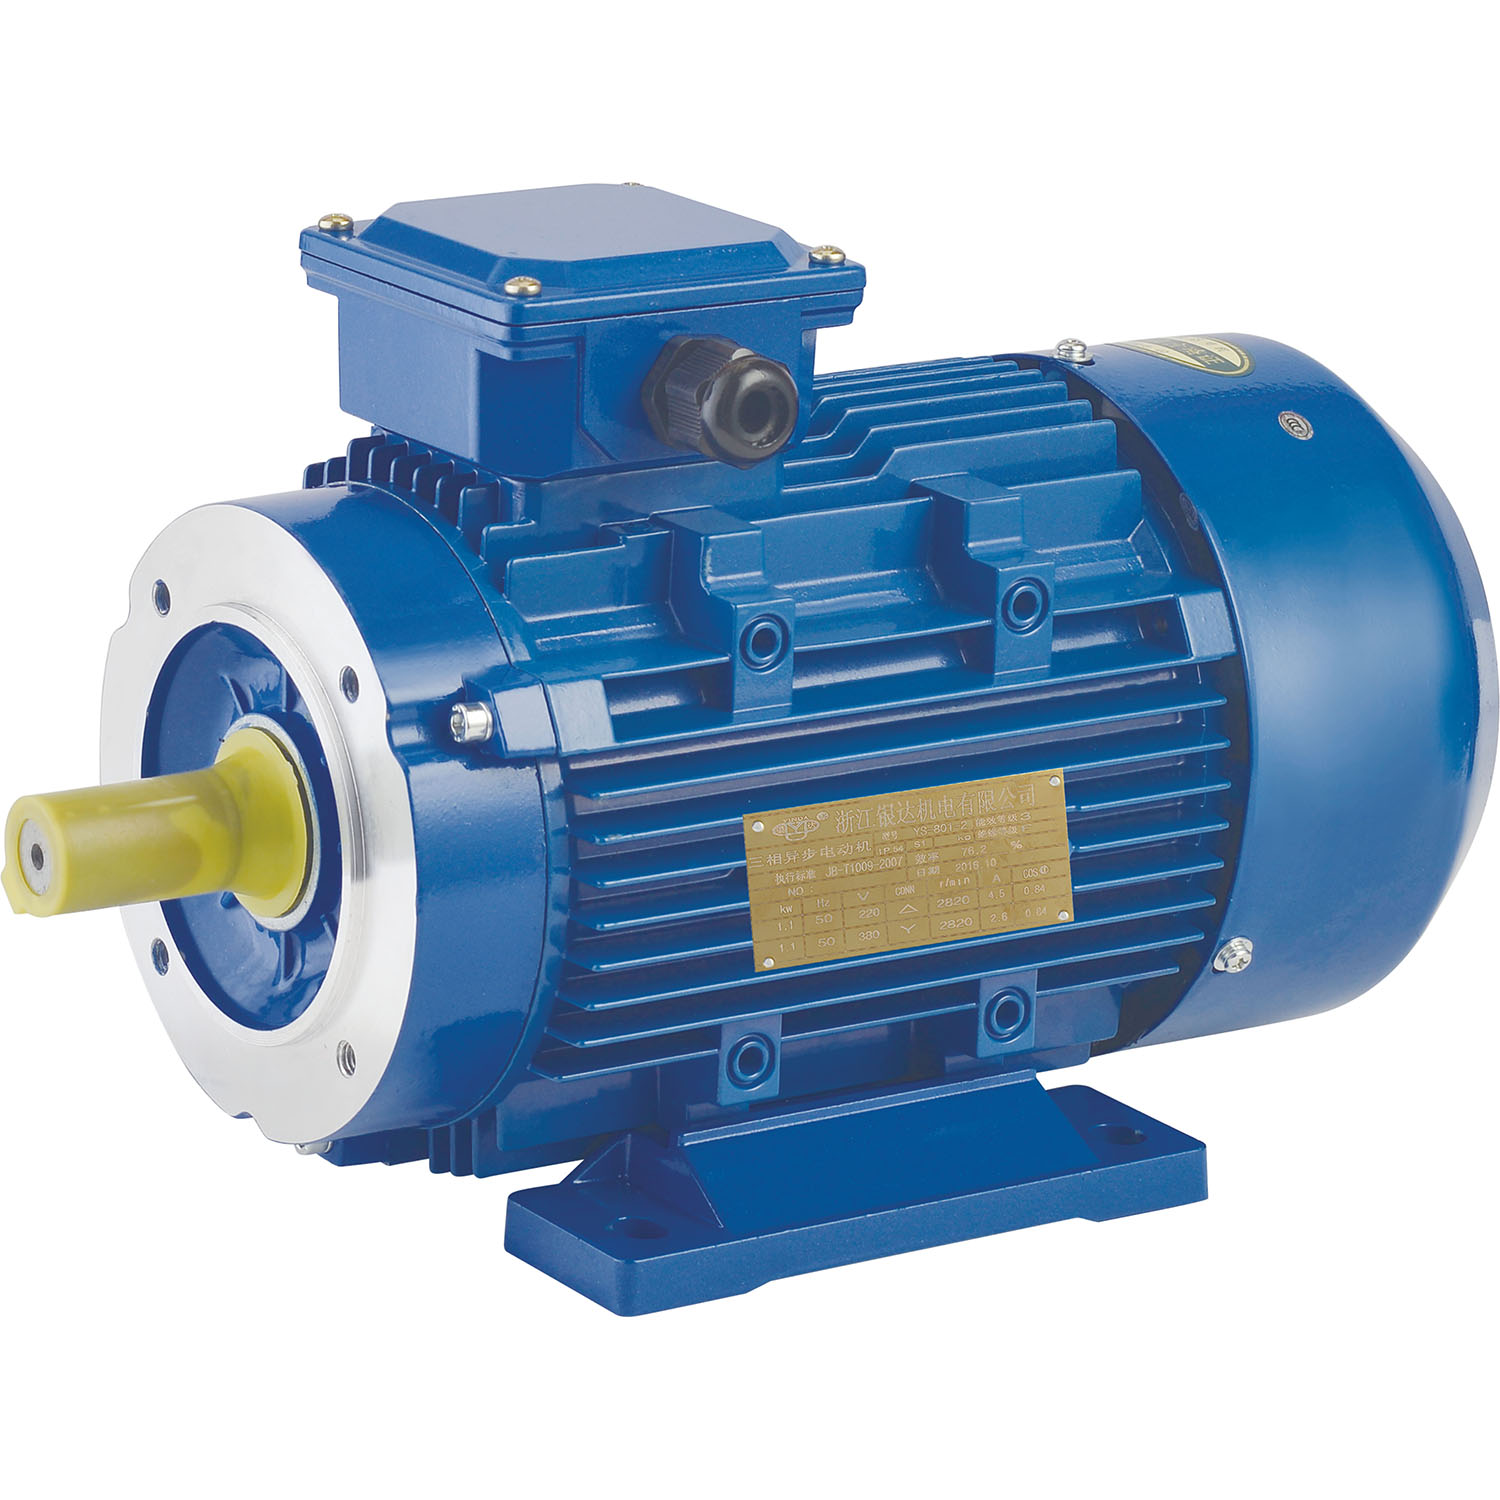 YS-631-2 0.18KW 0.25HP aluminum cylinder series high efficiency three-phase asynchronous motor